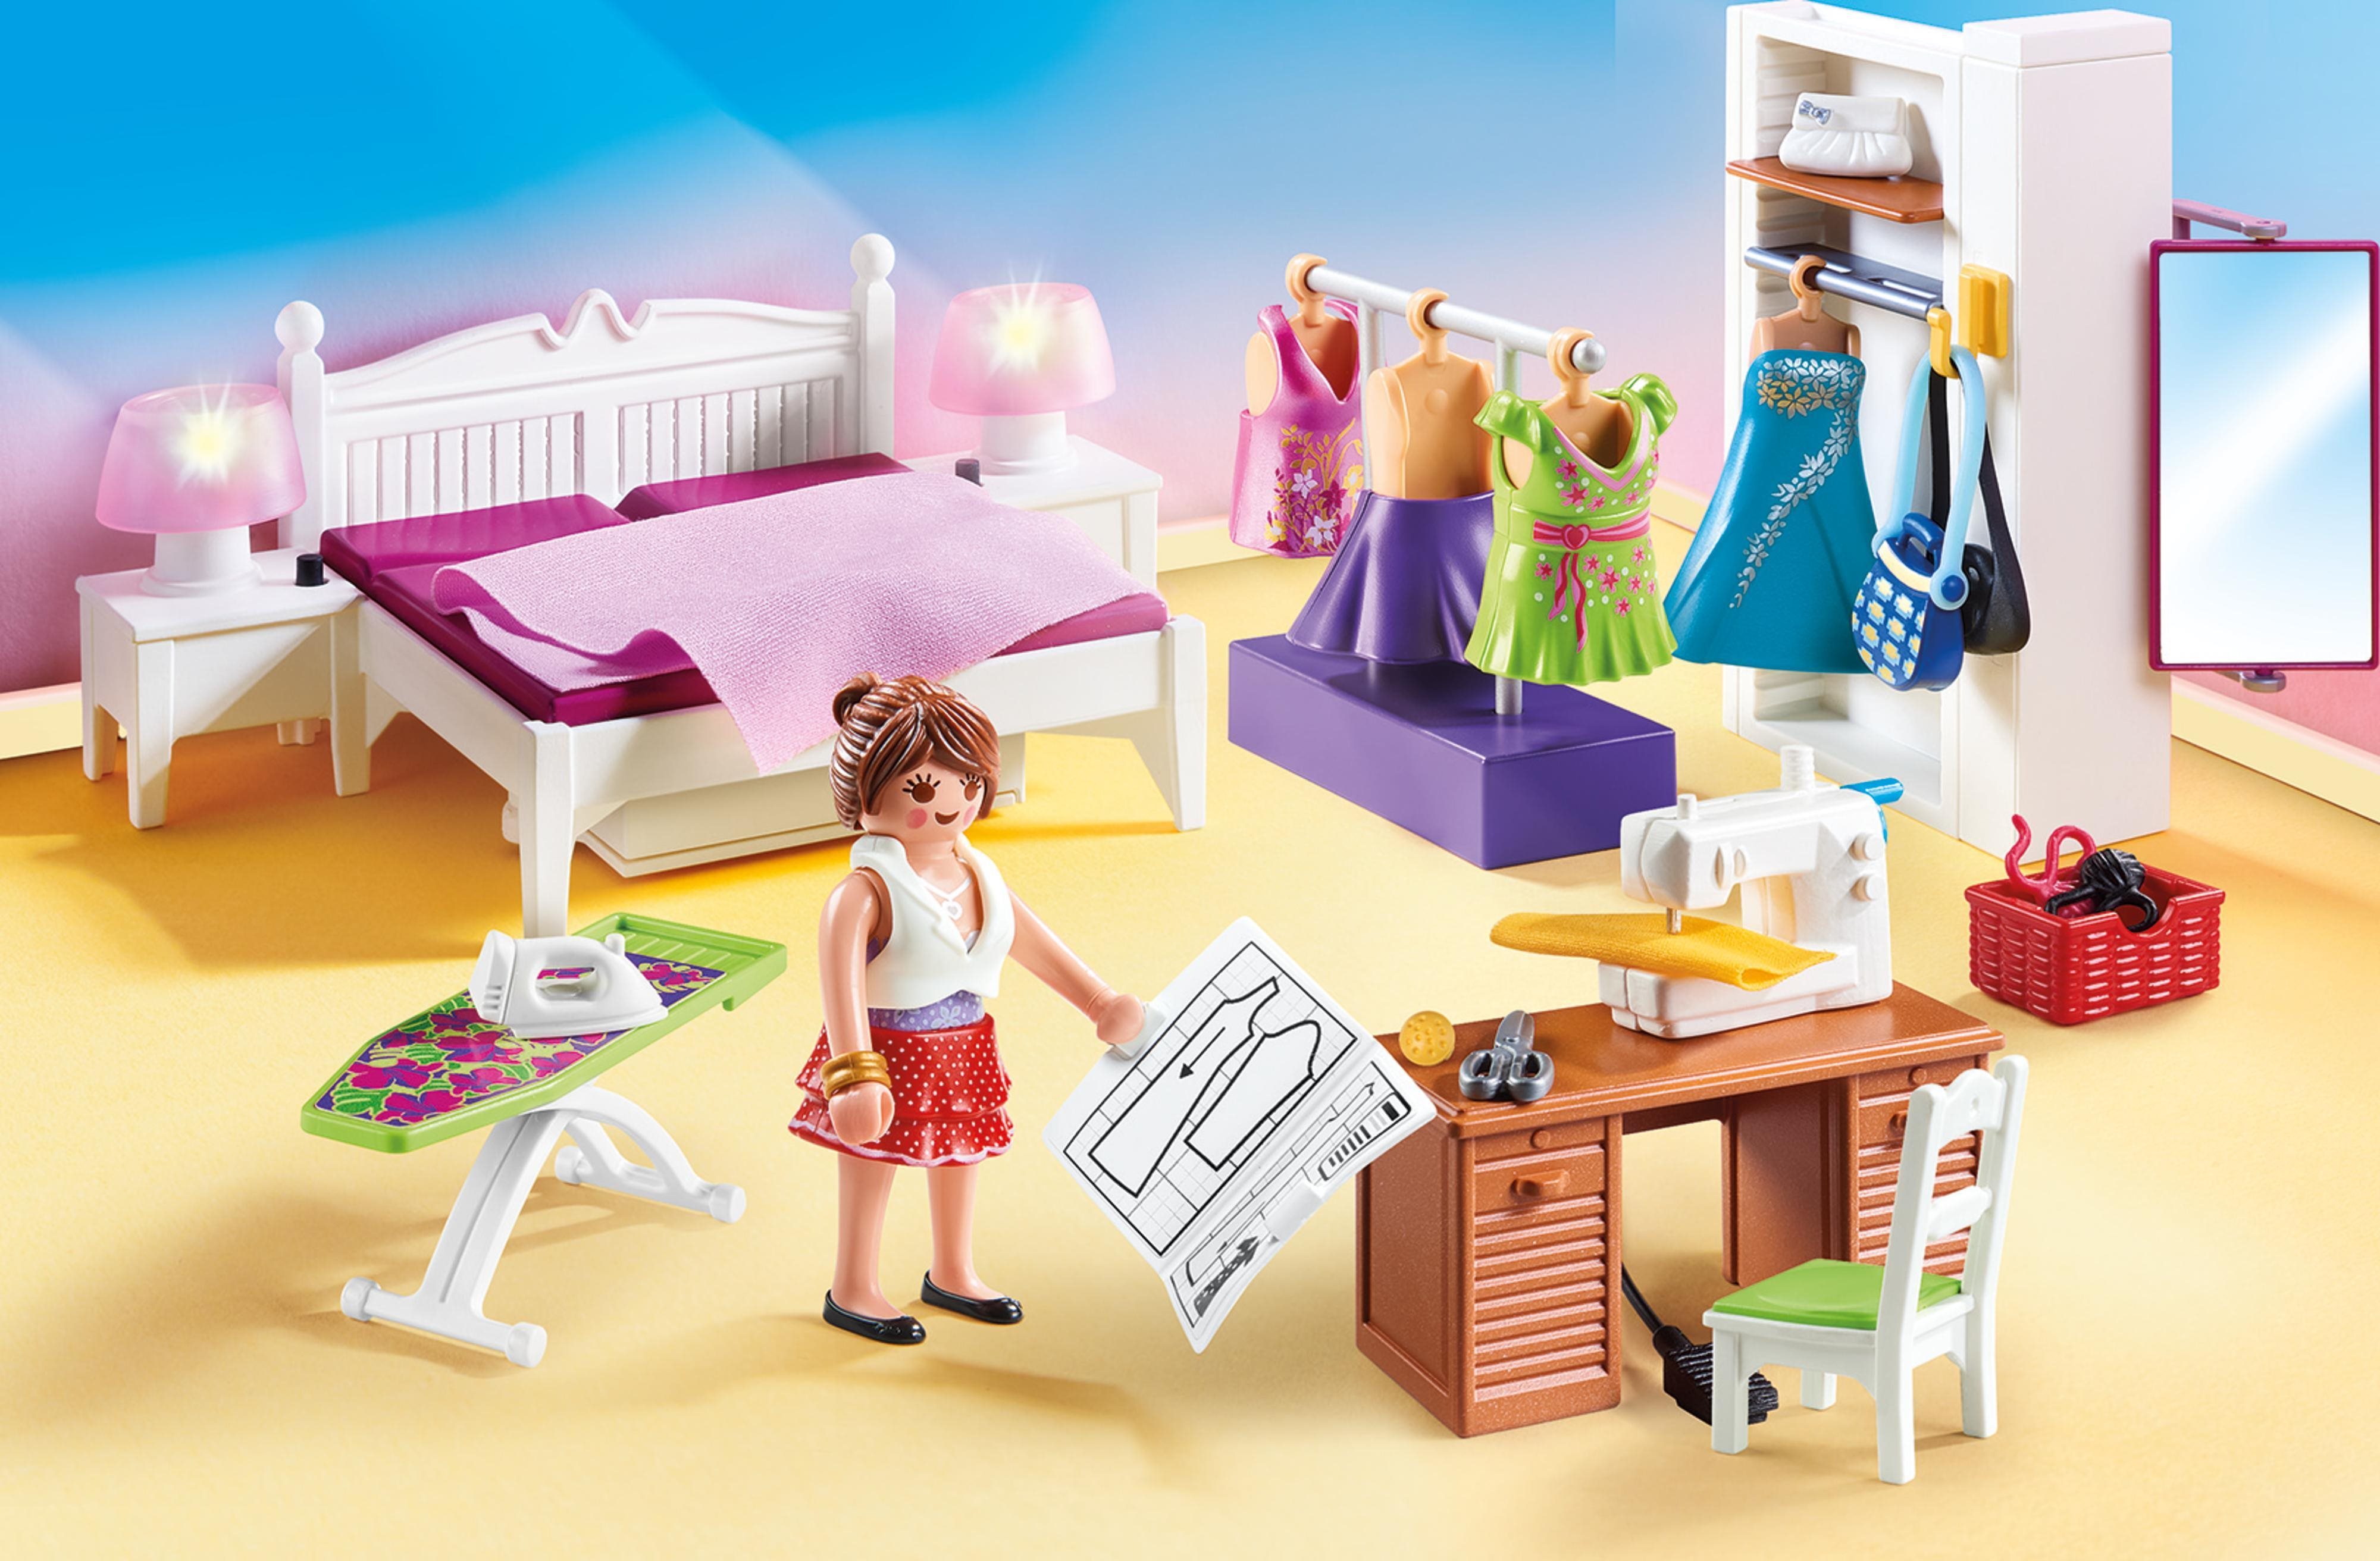 Building Set Playmobil 70208 Bedroom with Sewing Machine Lifestyle